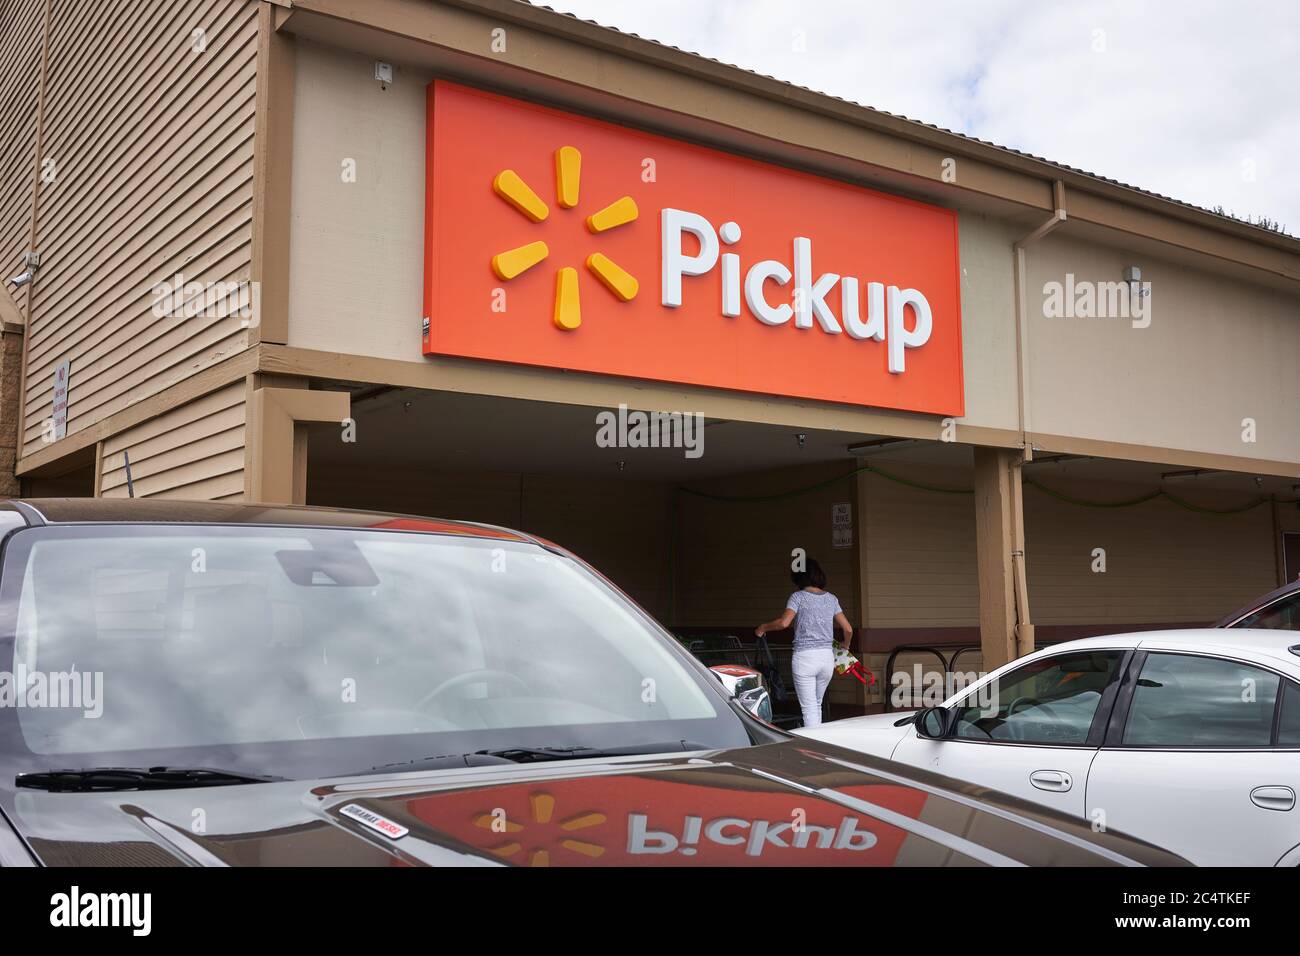 The Pickup sign is seen at a Walmart neighborhood market in West Linn, Oregon. The COVID-19 pandemic prompts an ongoing spike in online grocery orders. Stock Photo